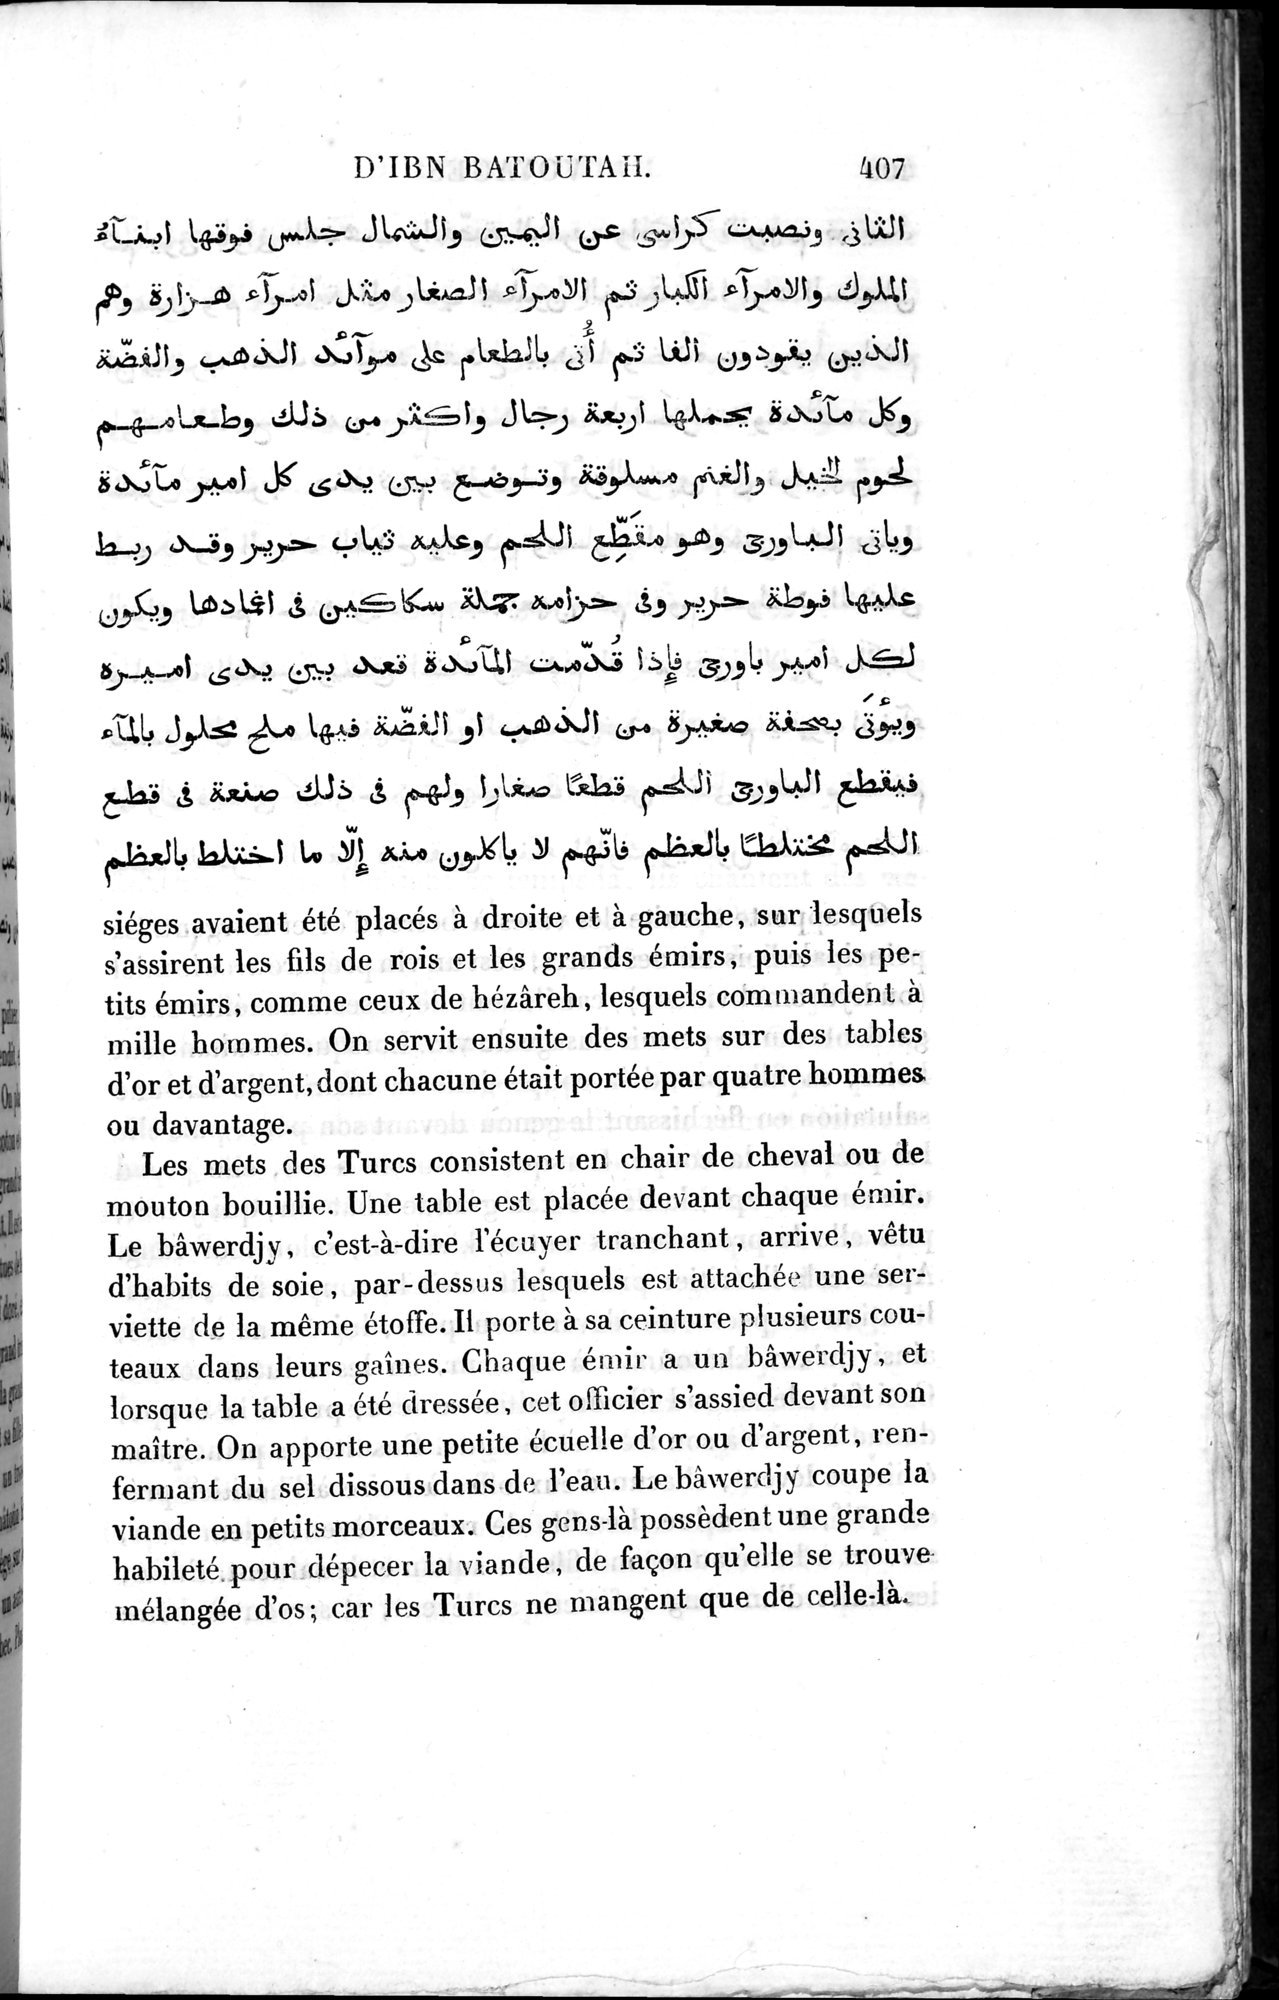 Voyages d'Ibn Batoutah : vol.2 / Page 435 (Grayscale High Resolution Image)